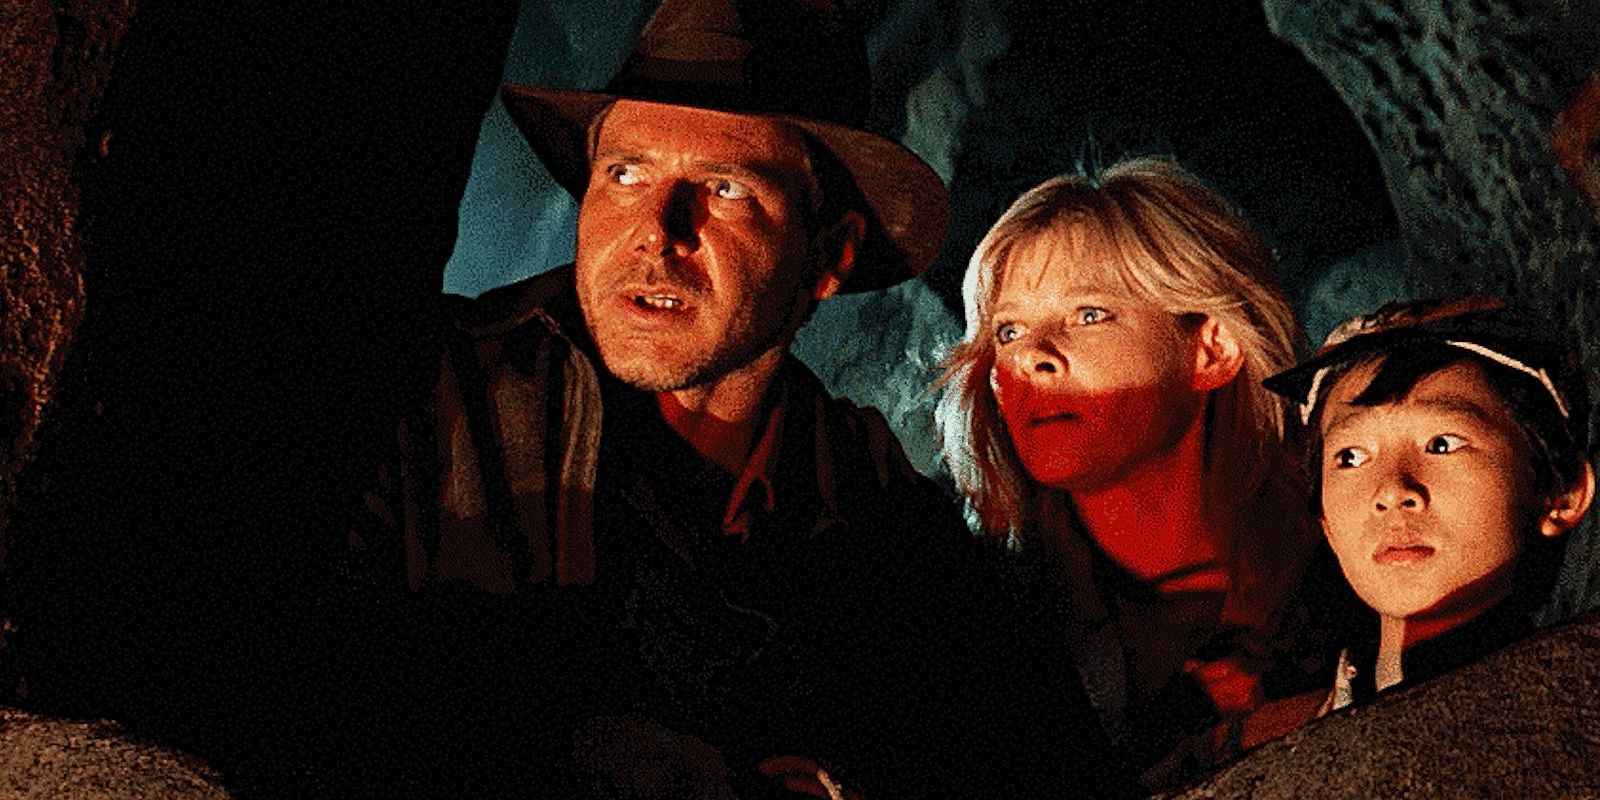 Indy, Willie, and Short Round underground in Indiana Jones and the Temple of Doom